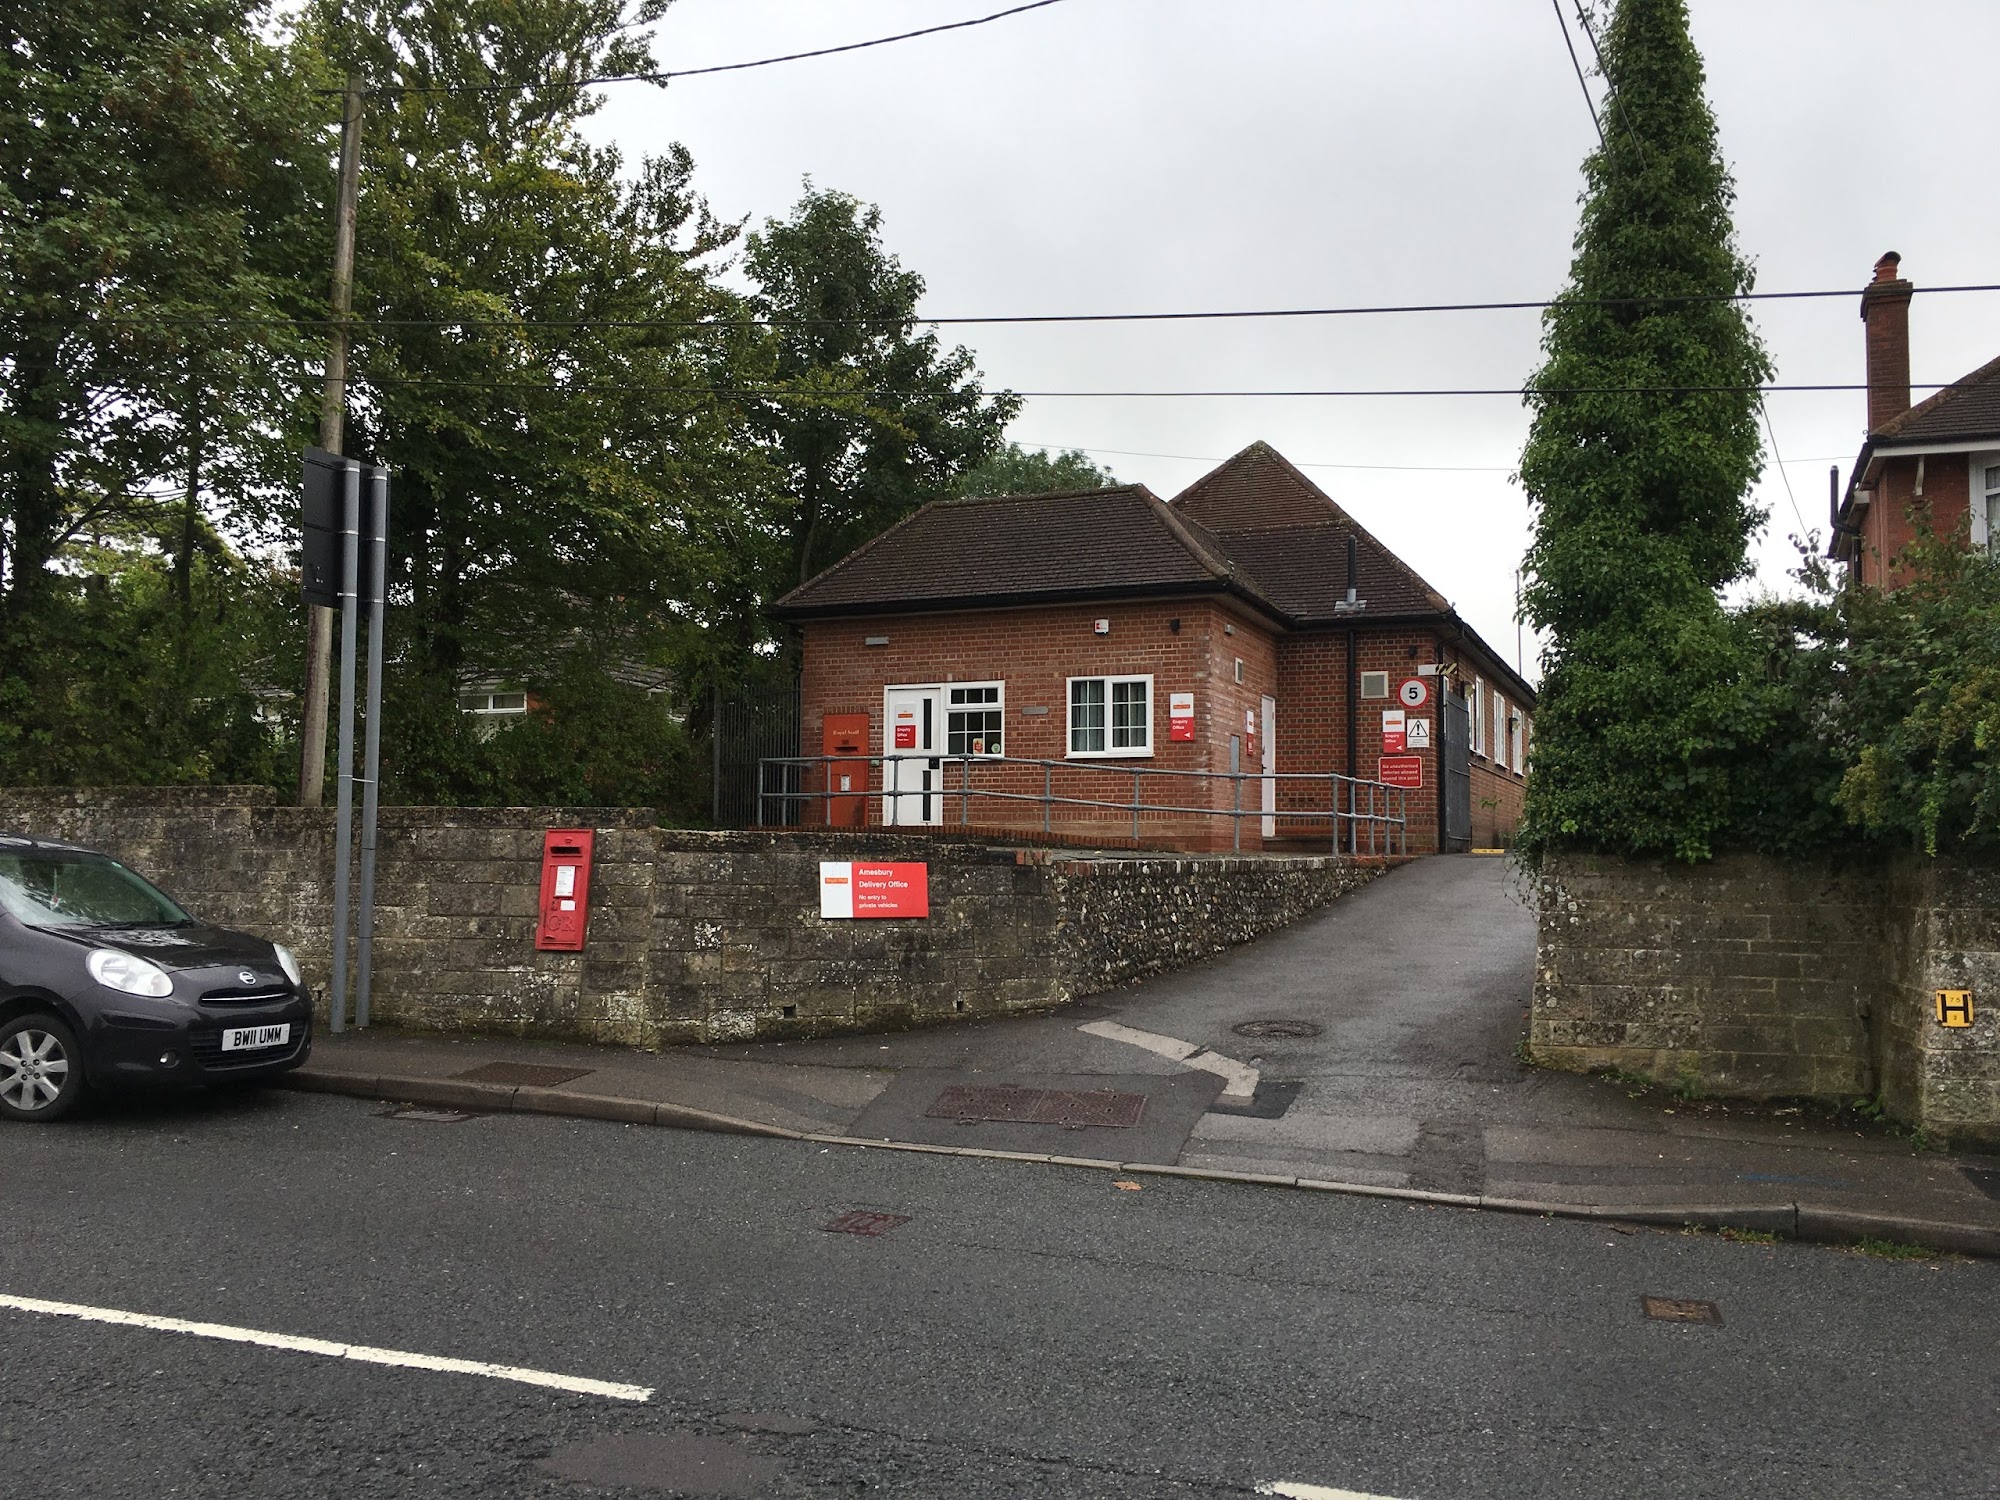 Royal Mail Delivery Office, Amesbury